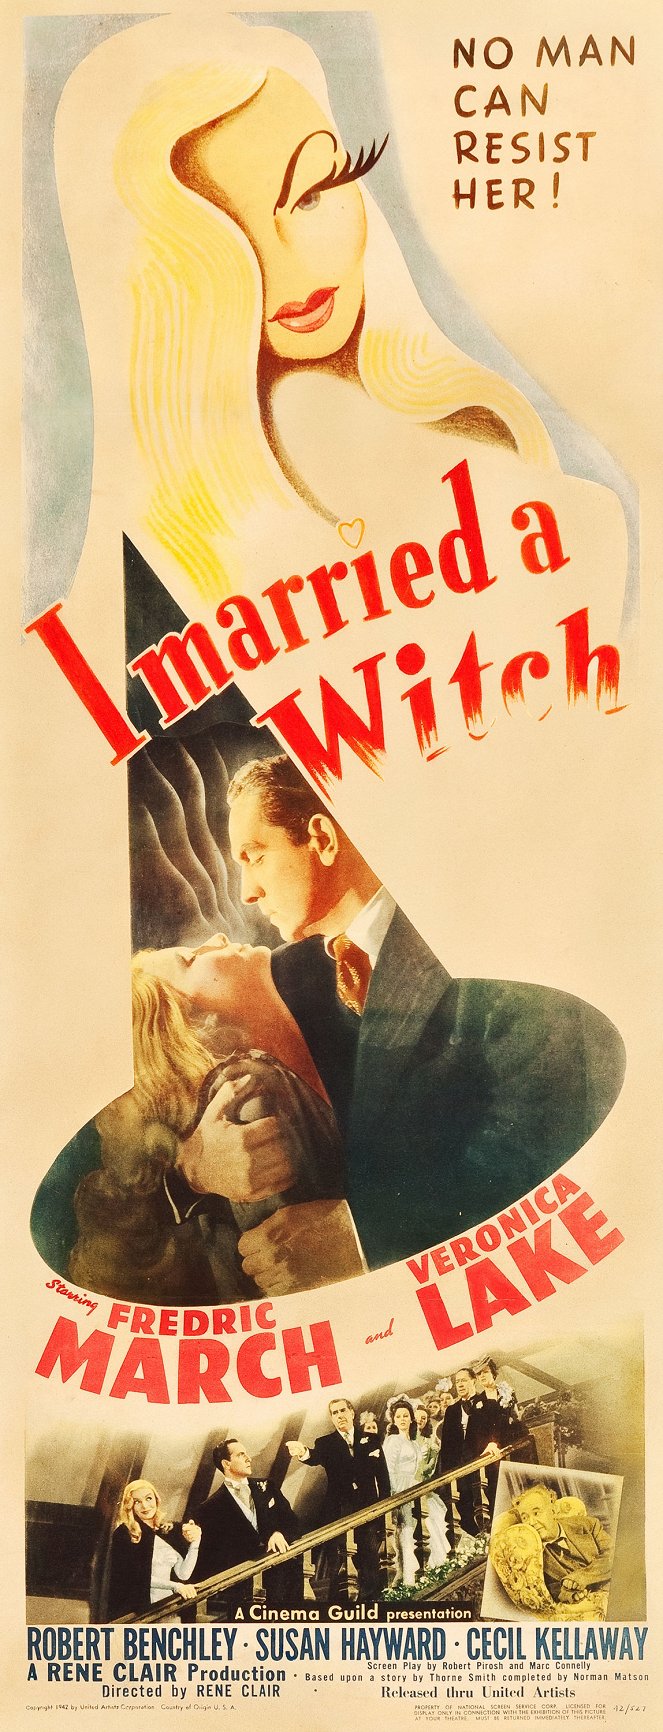 I Married a Witch - Posters